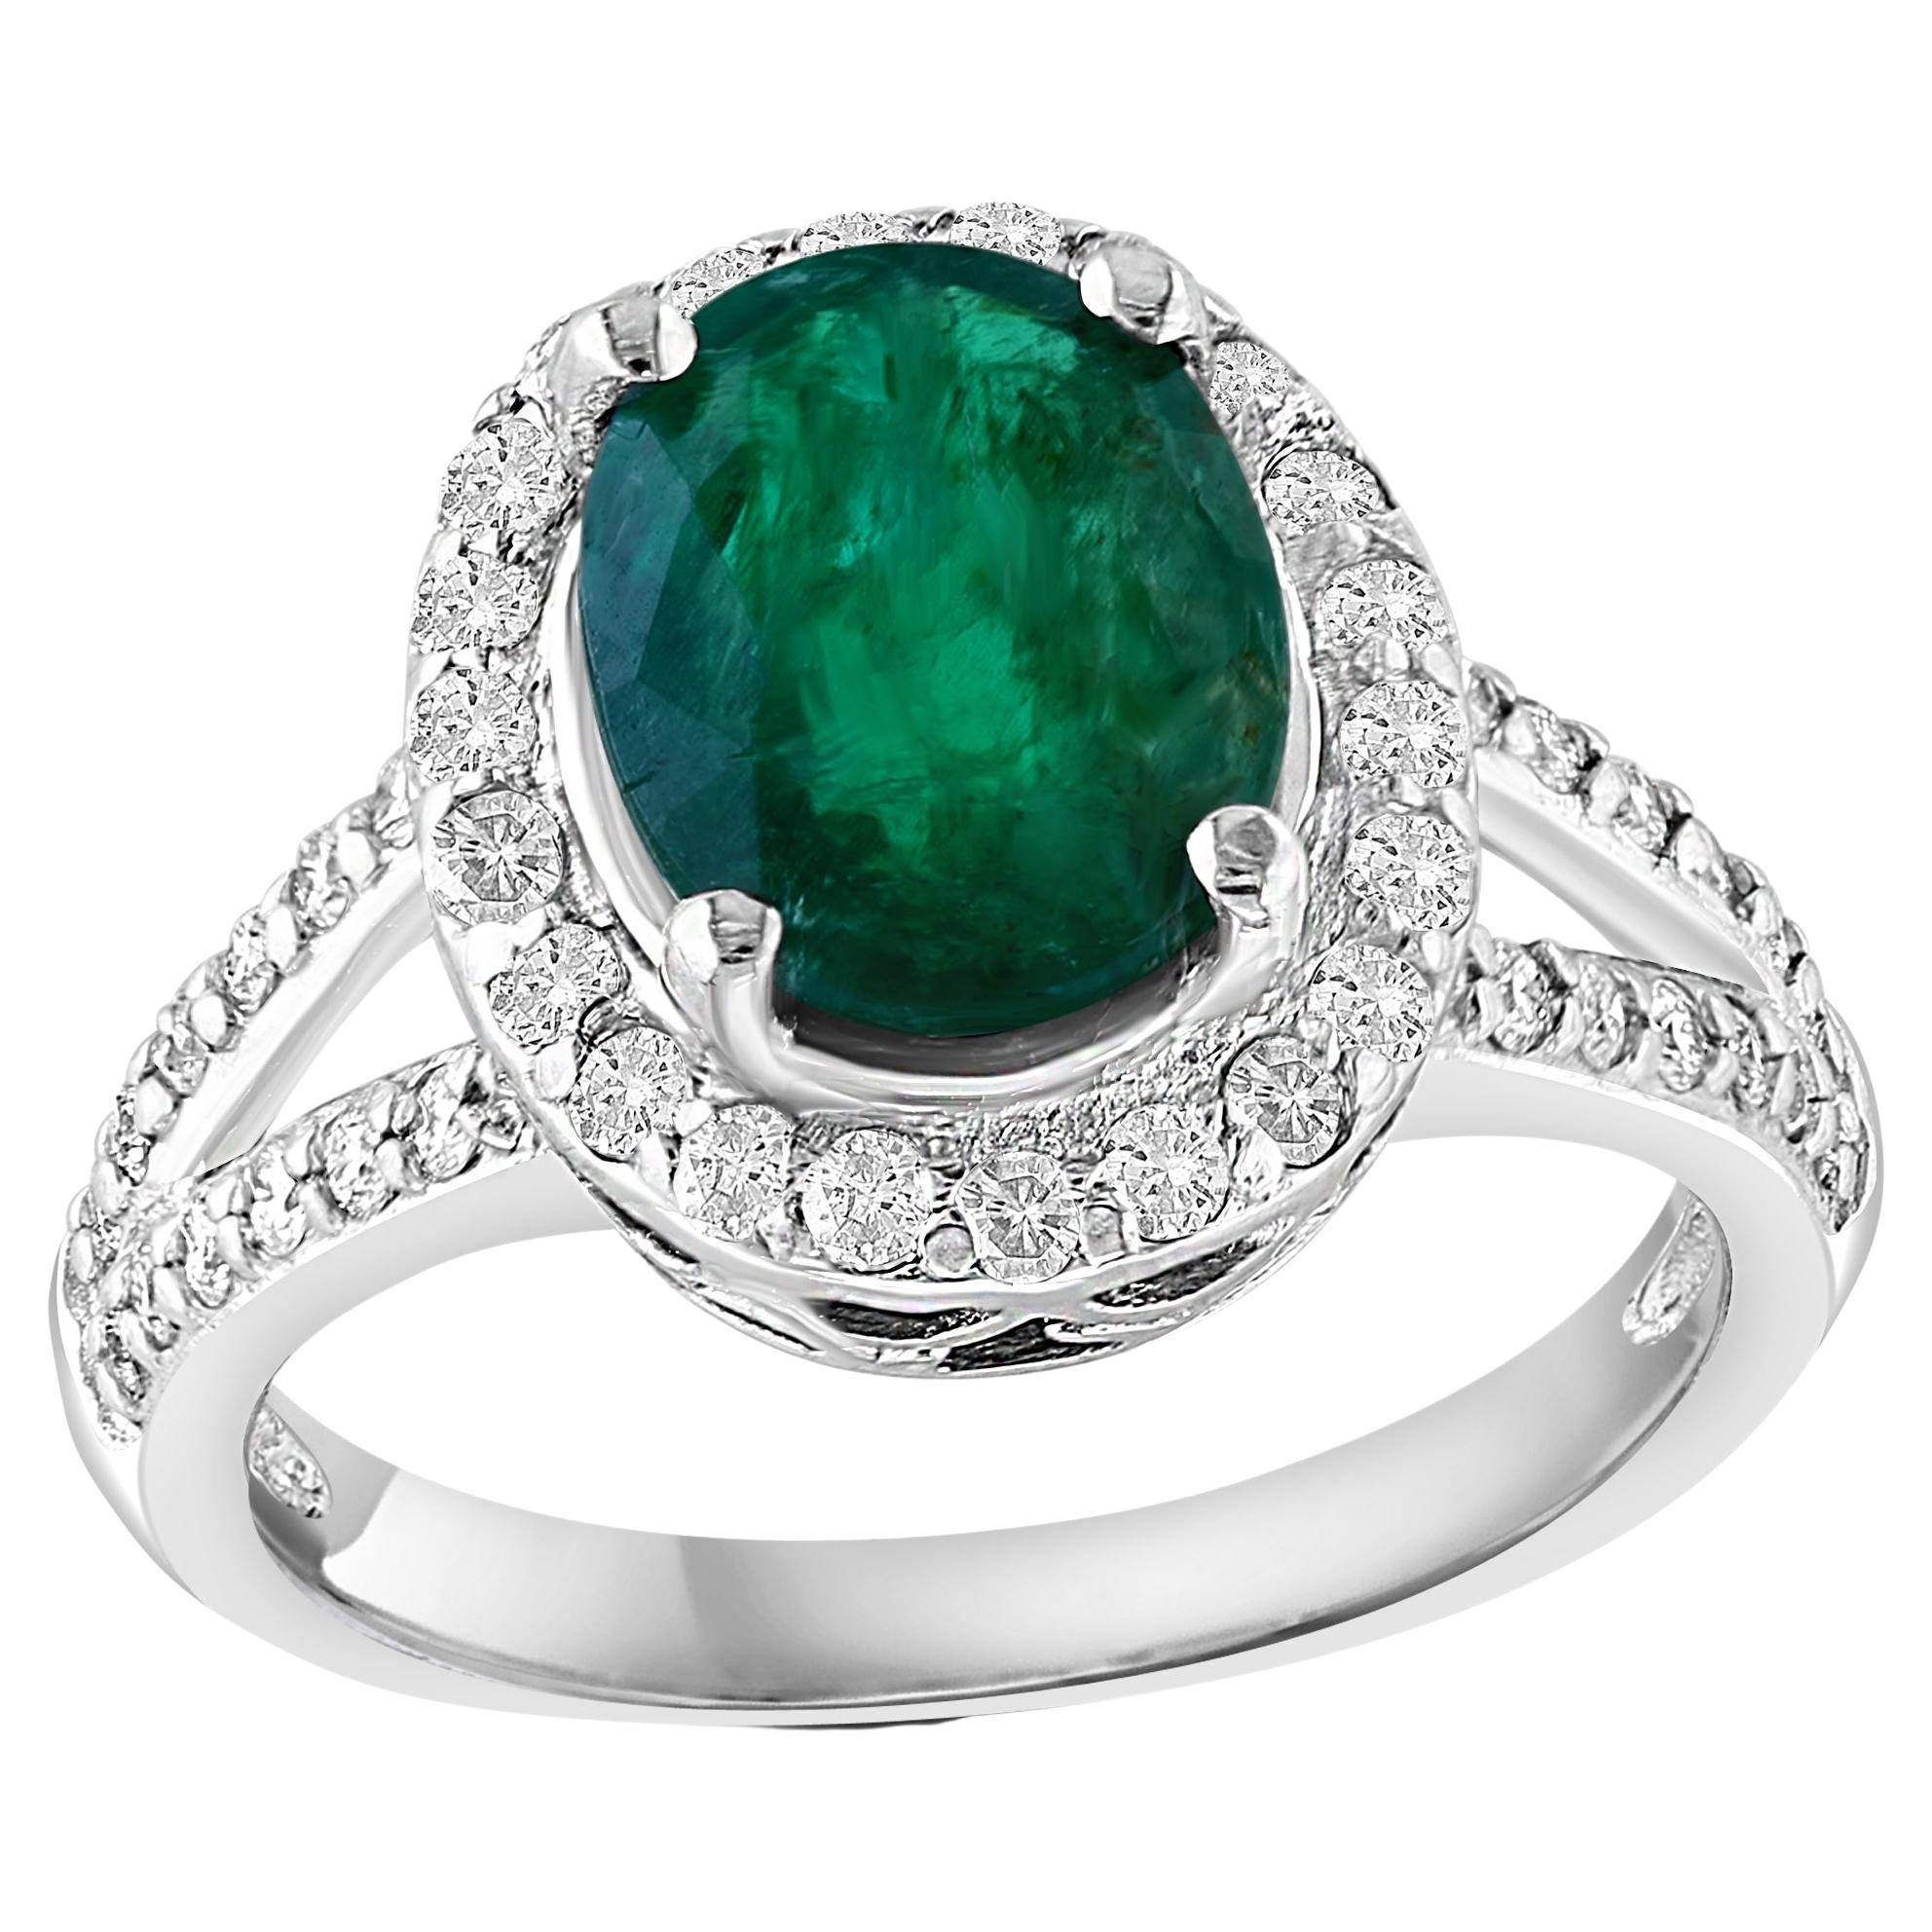 Prepare to be amazed by the sheer beauty of the 2.5 Carat Oval Natural Zambian Emerald & 2 ct of Diamond Ring, a true masterpiece crafted in exquisite 14 Karat White Gold. This extraordinary ring showcases a magnificent natural Zambian emerald,